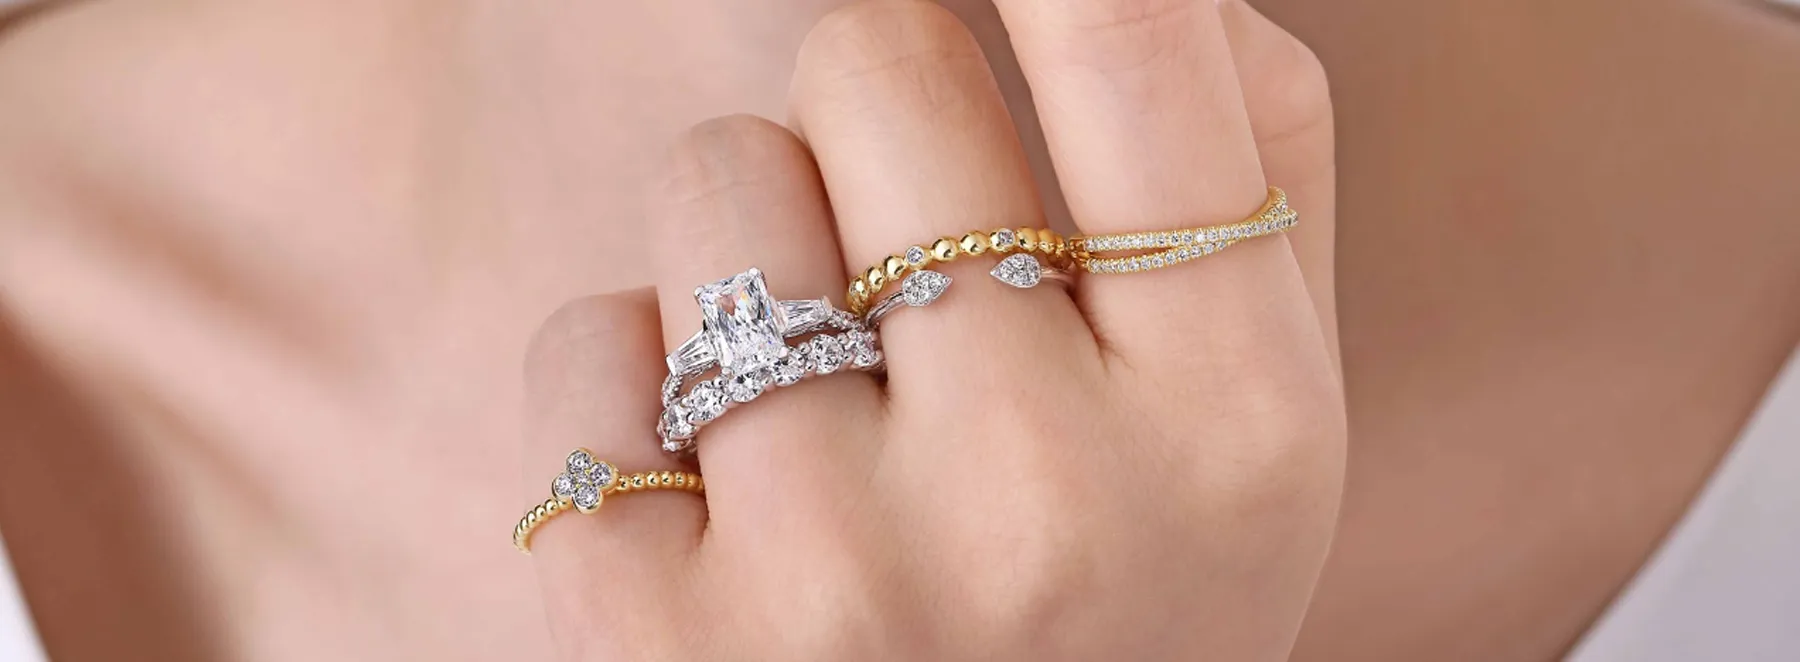 Unique Wedding Bands for Sale at Hannoush Jewelers